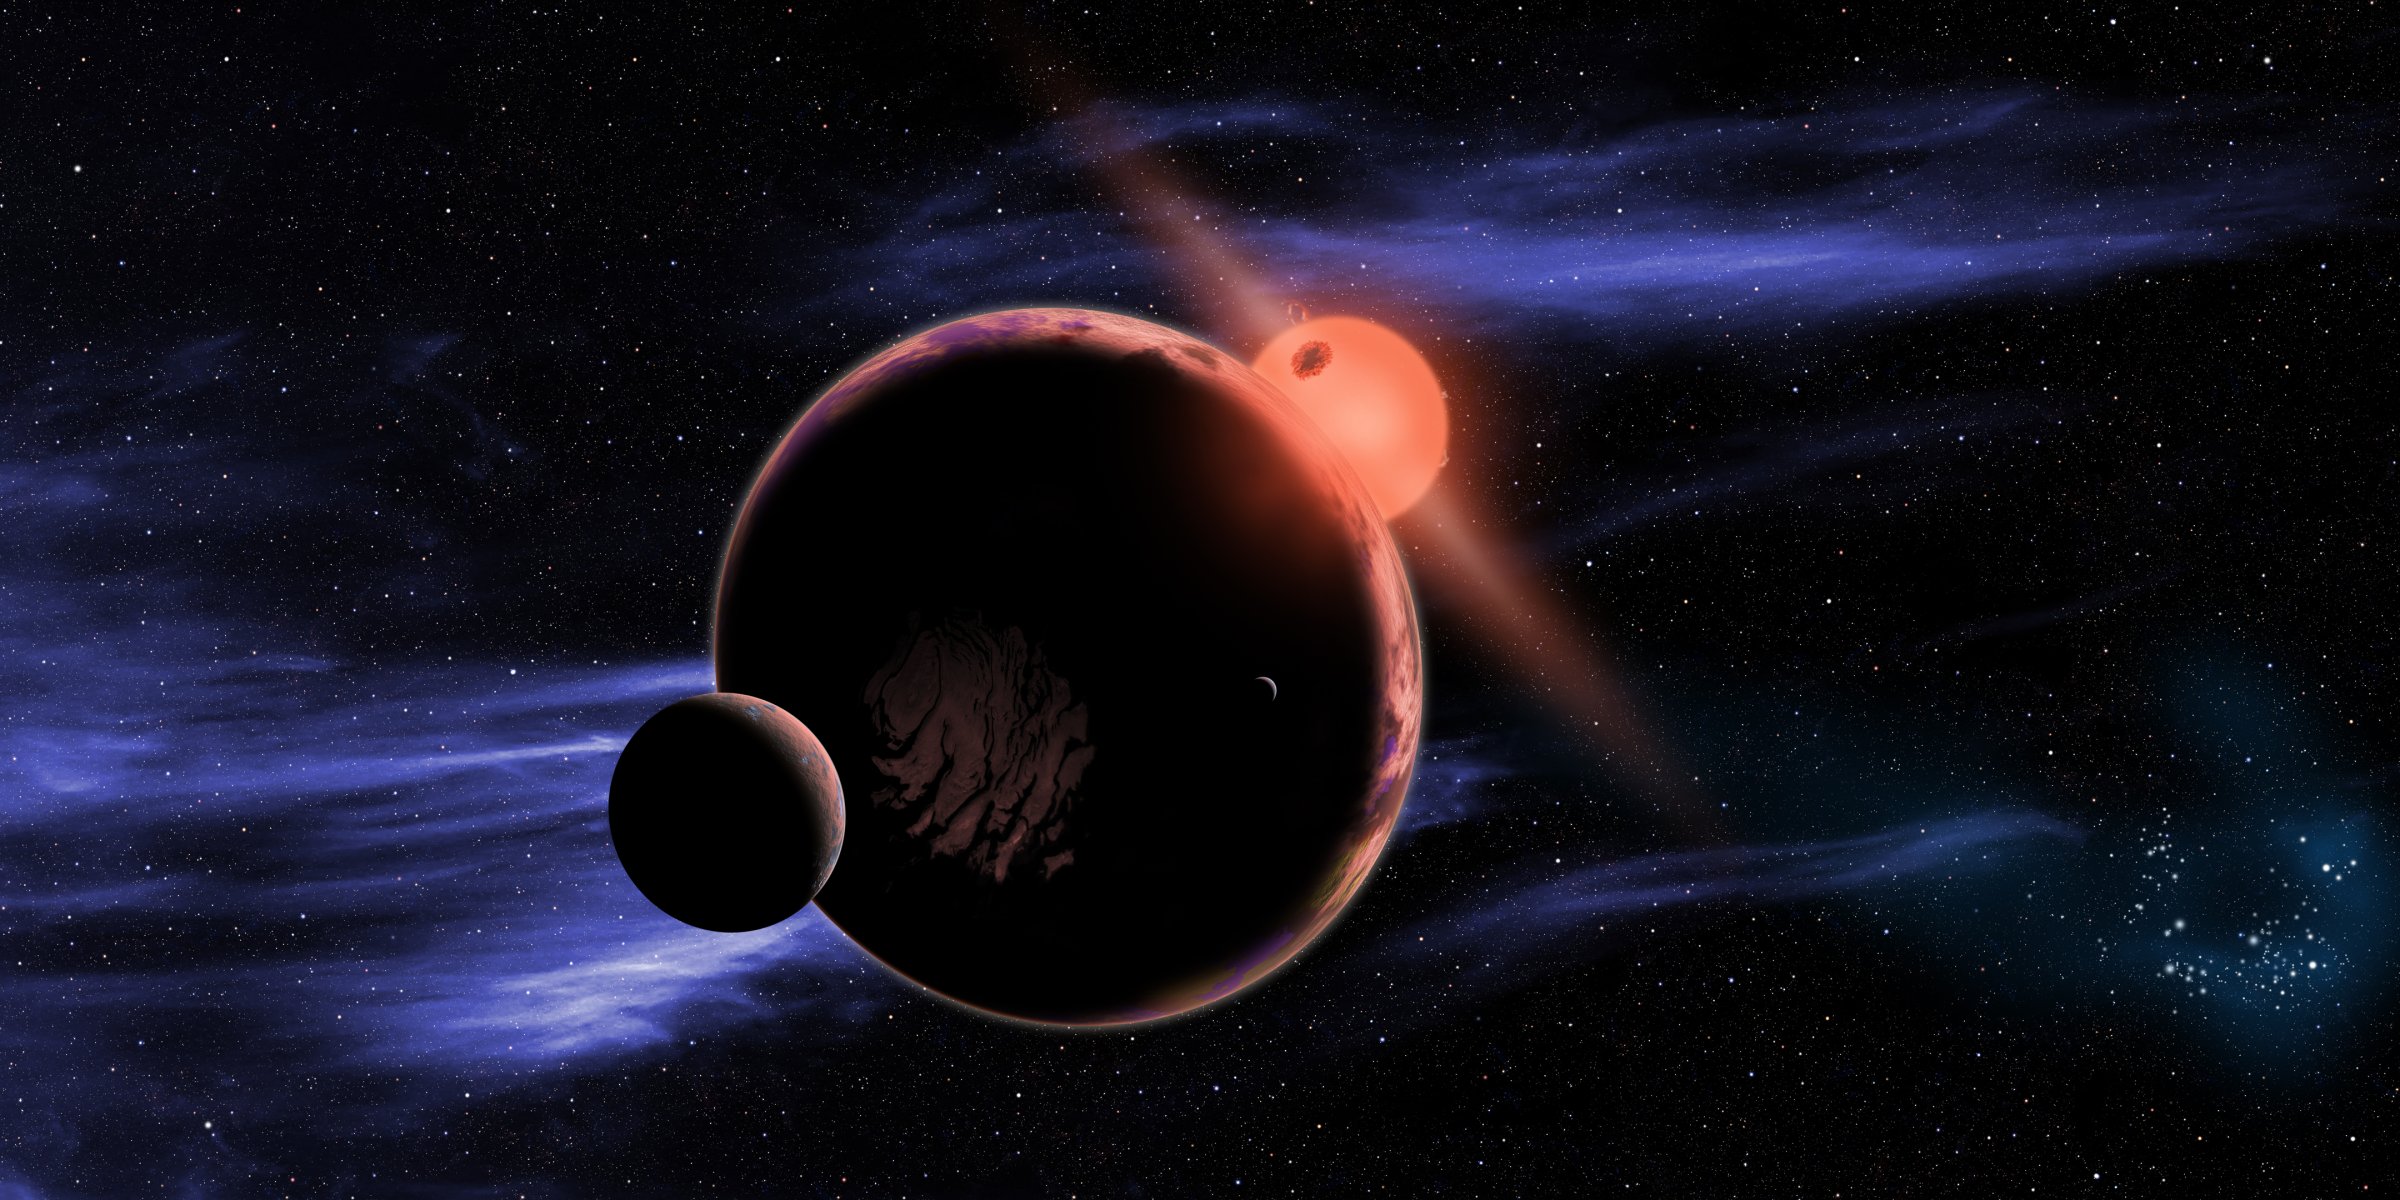 The artist's conception shows a hypothetical planet with two moons orbiting in the habitable zone of a red dwarf star.